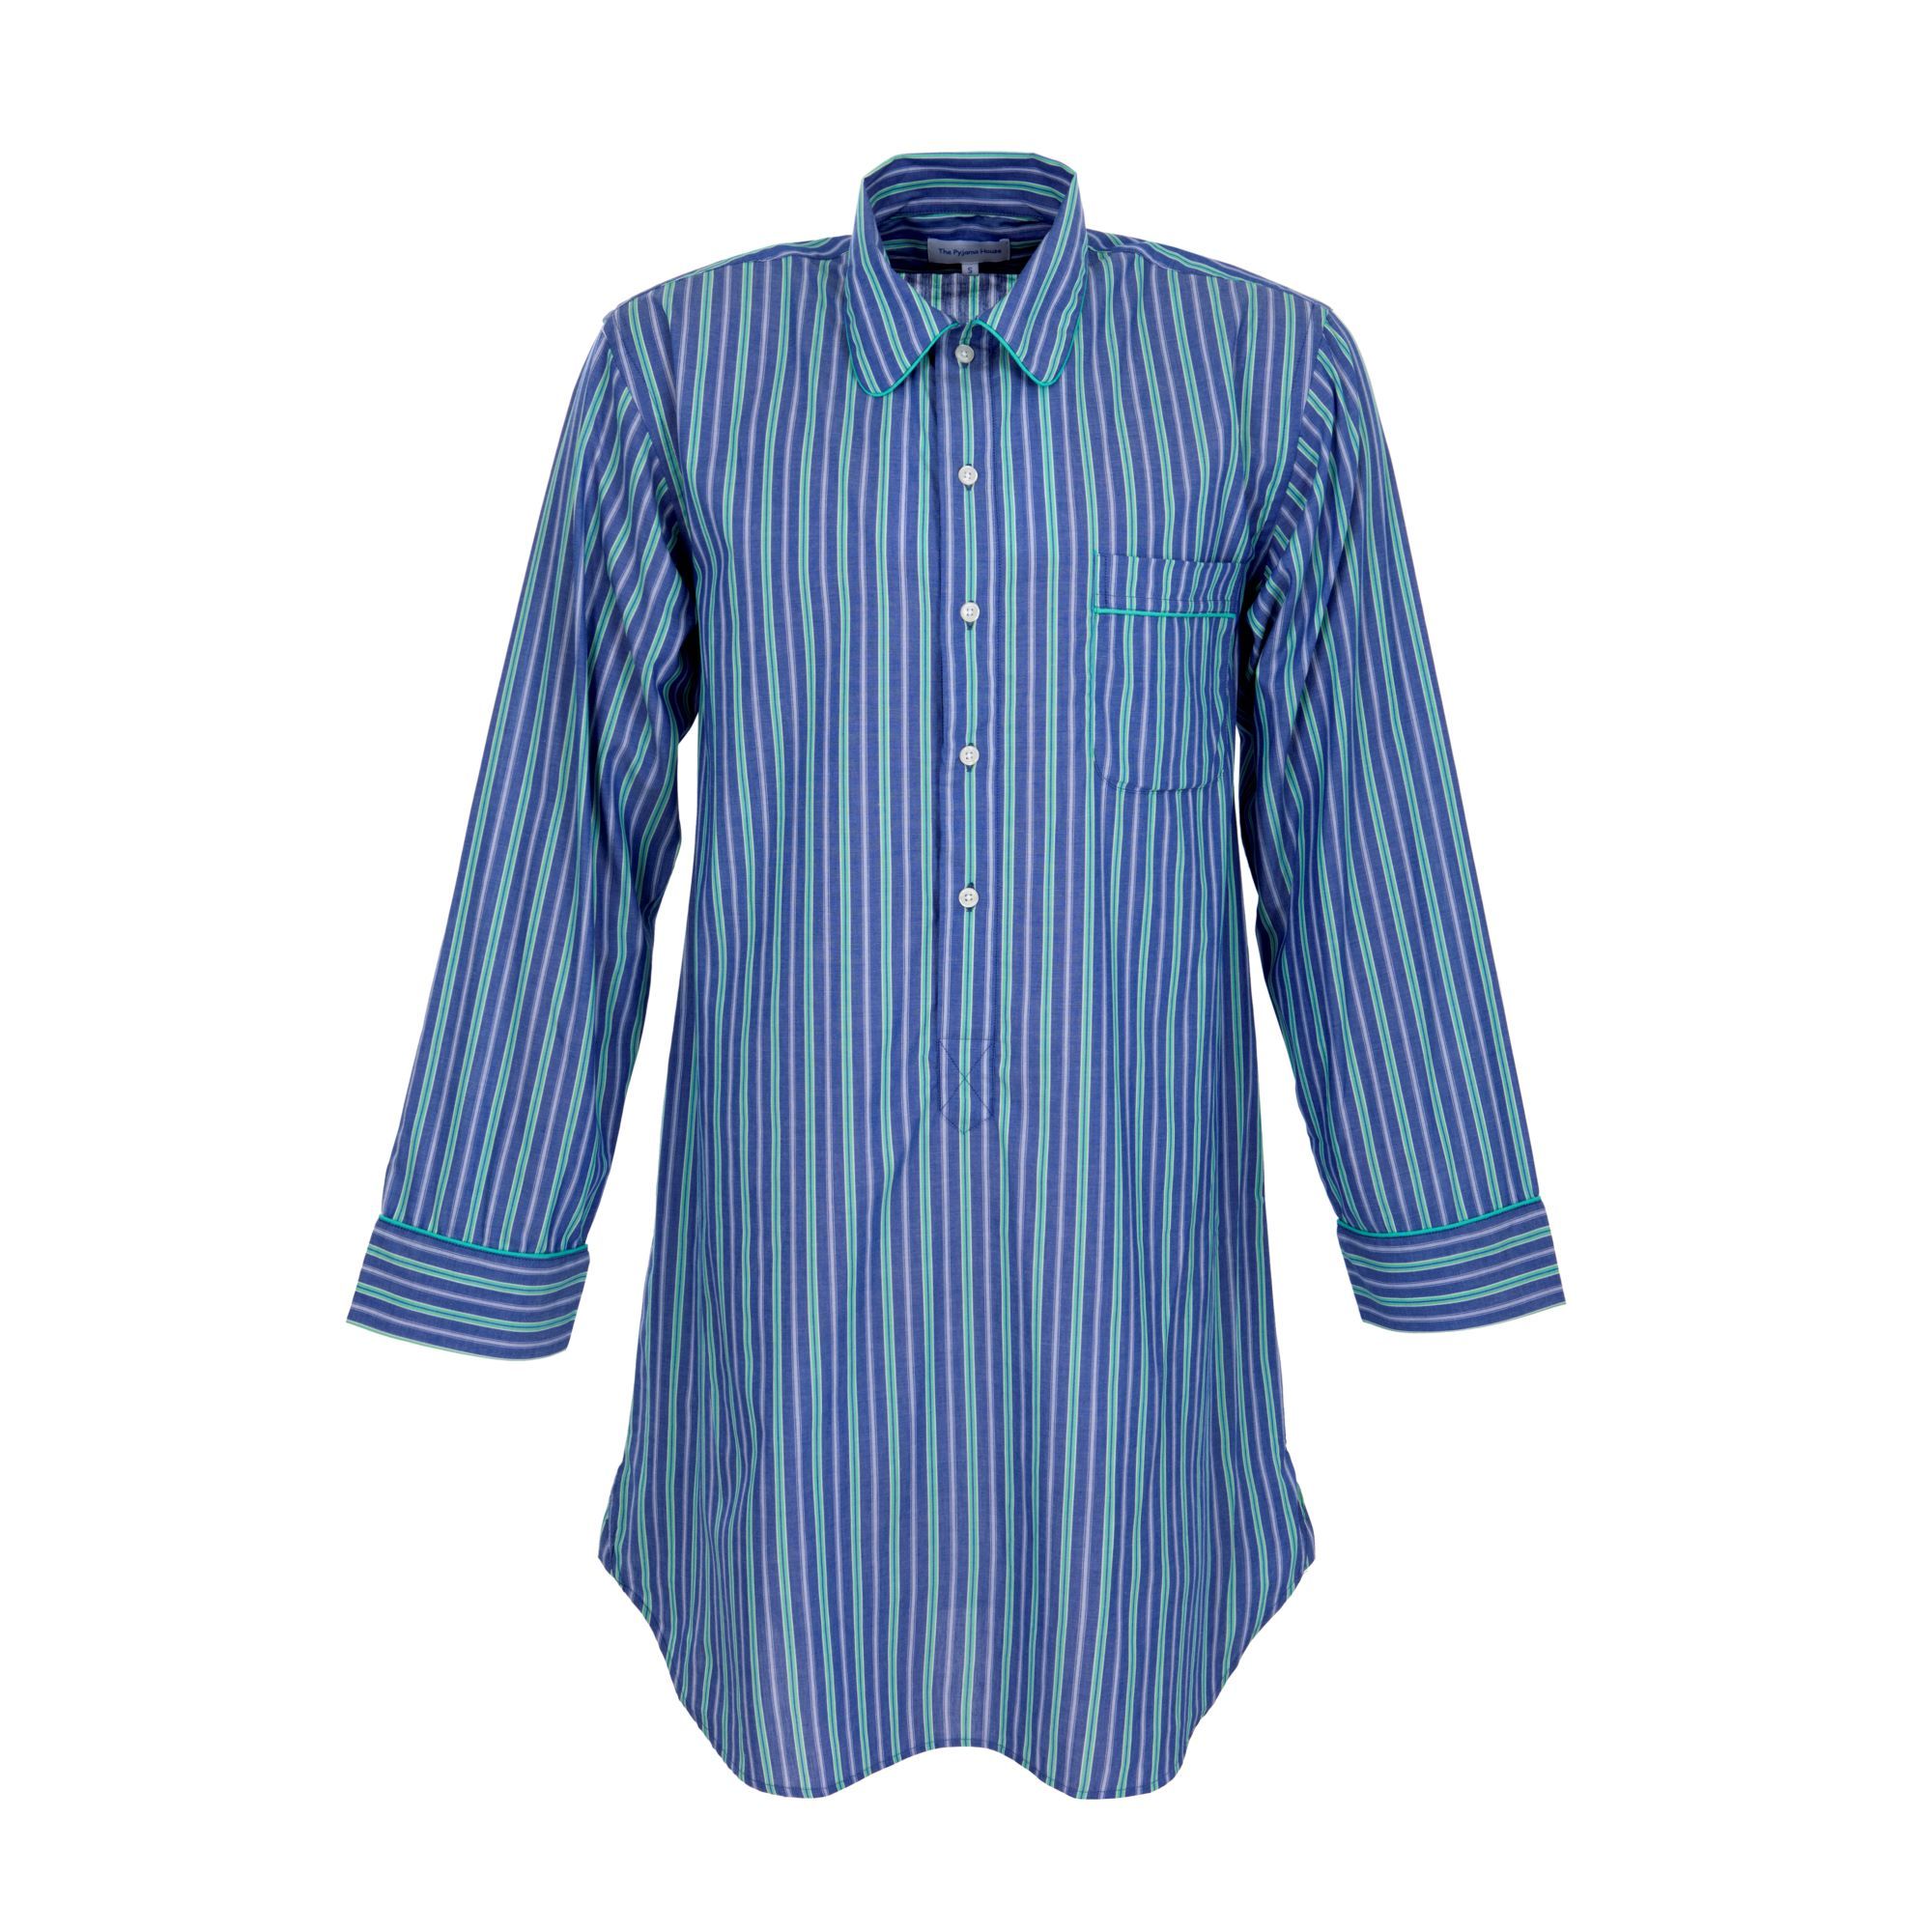 Adult nightshirt in deep blue and green stripe